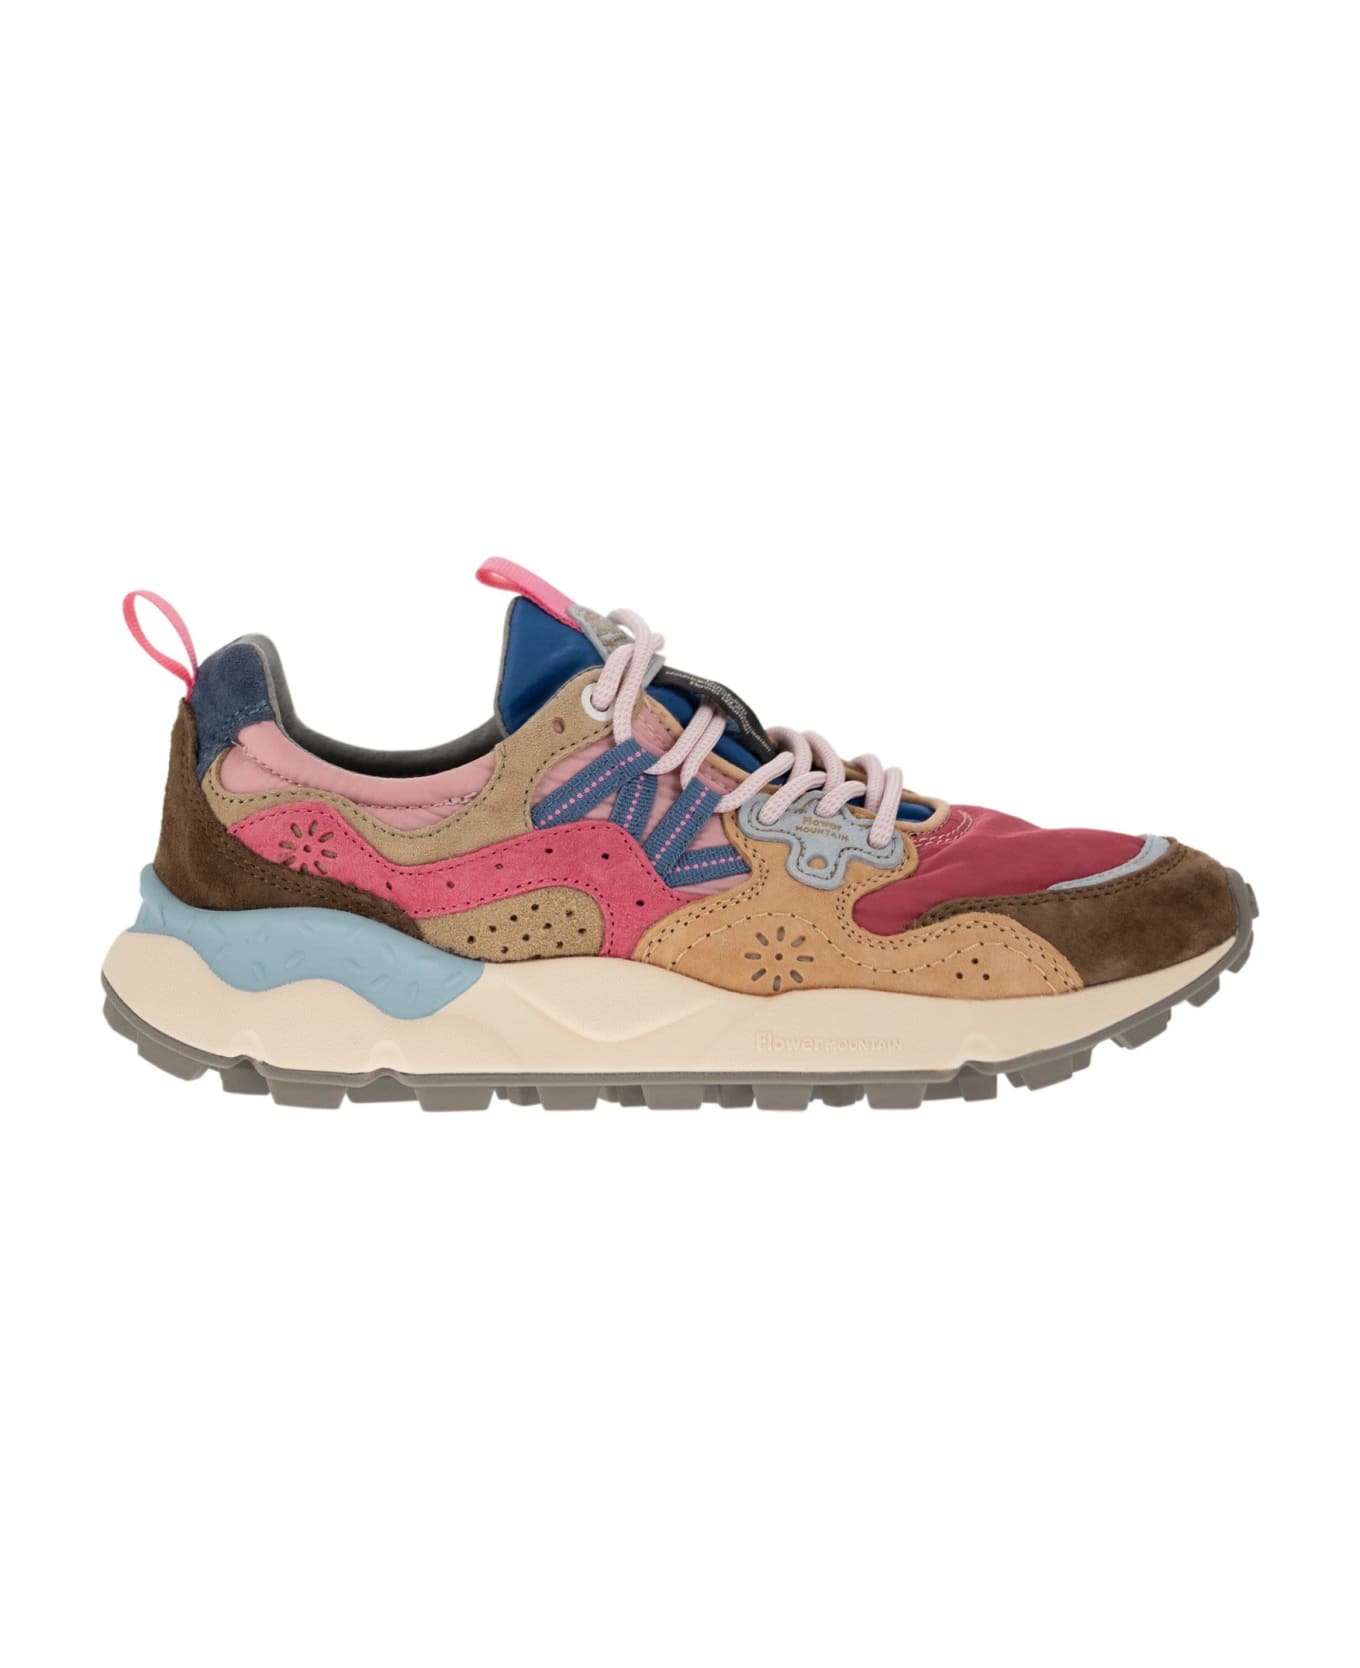 Flower Mountain Yamano 3 - Sneakers In Suede And Technical Fabric - Pink